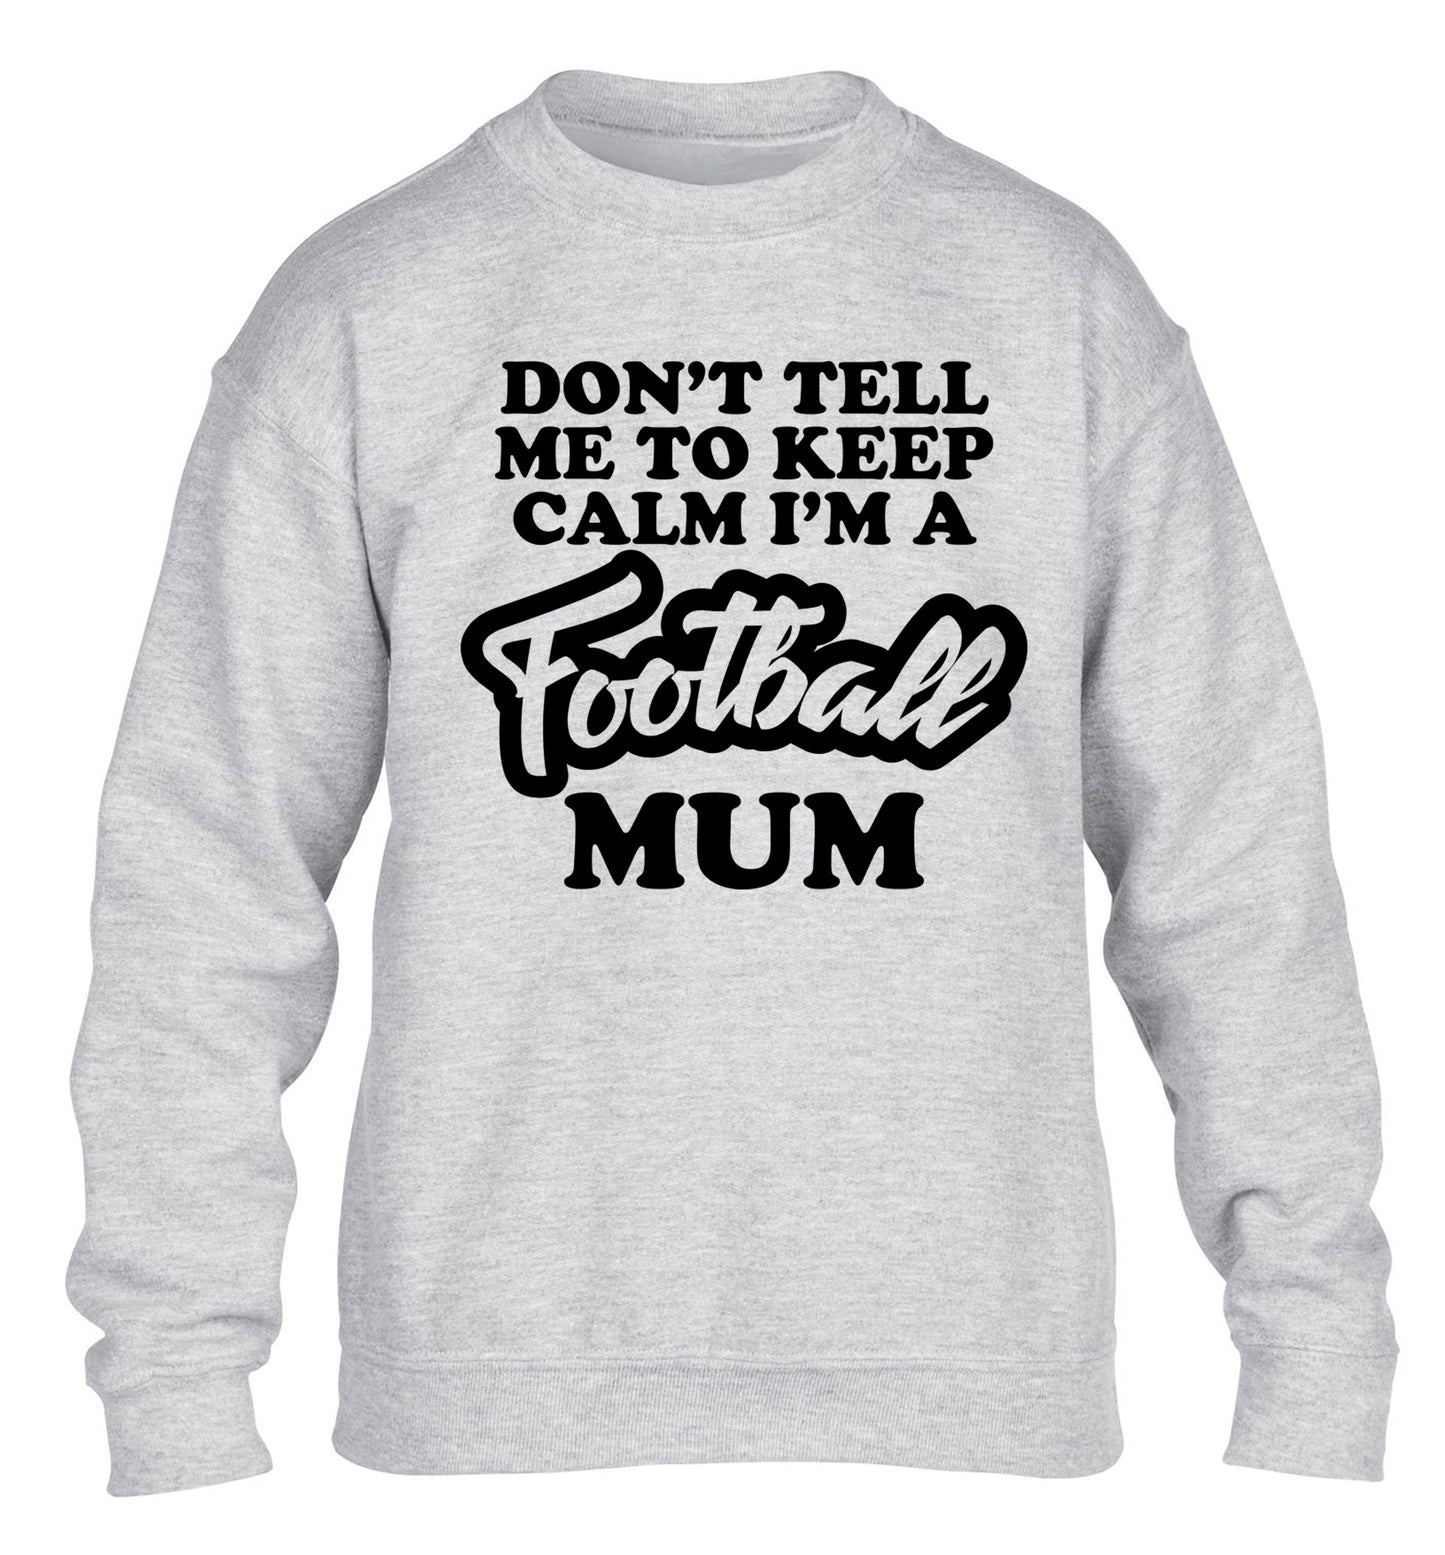 Don't tell me to keep calm I'm a football mum children's grey sweater 12-14 Years